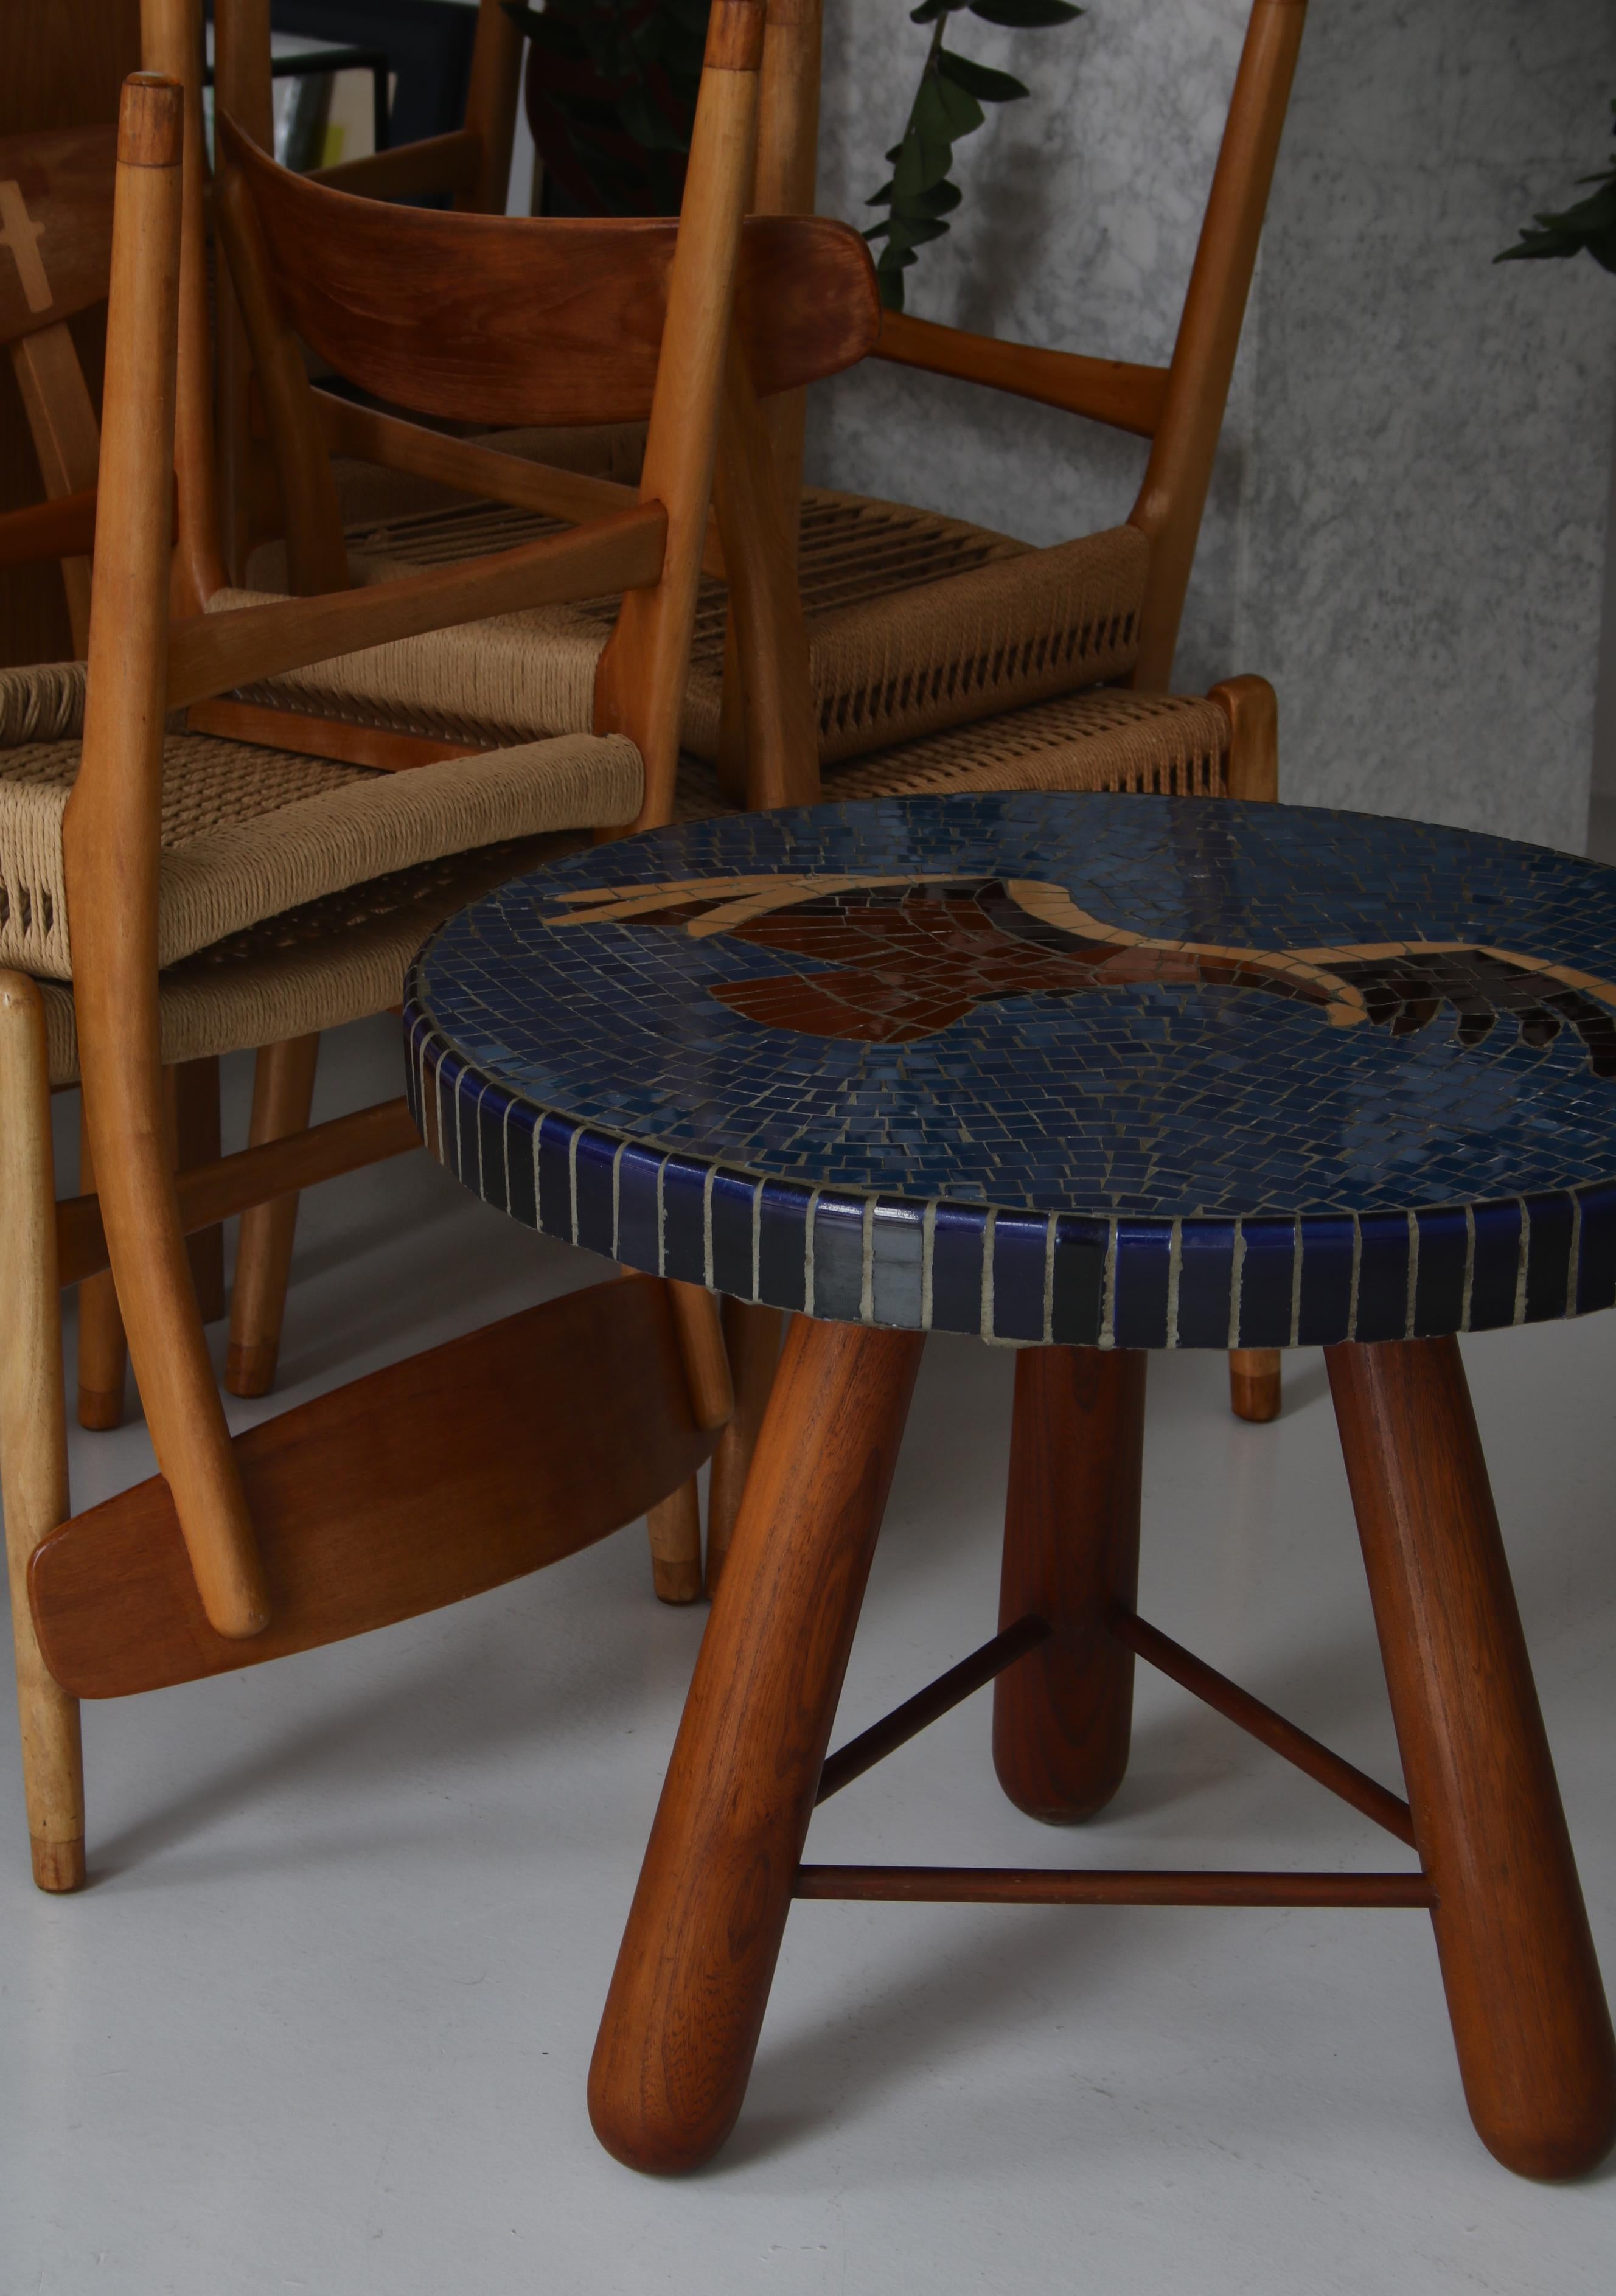 Amazing modernist side or coffee table made by Danish cabinetmaker Otto Færge in the 1940s. The oval table top is decorated by the artist Paul Hedegård with a mosaic depicting an eagle on a deep blue background of ceramic tiles. The big chunky club